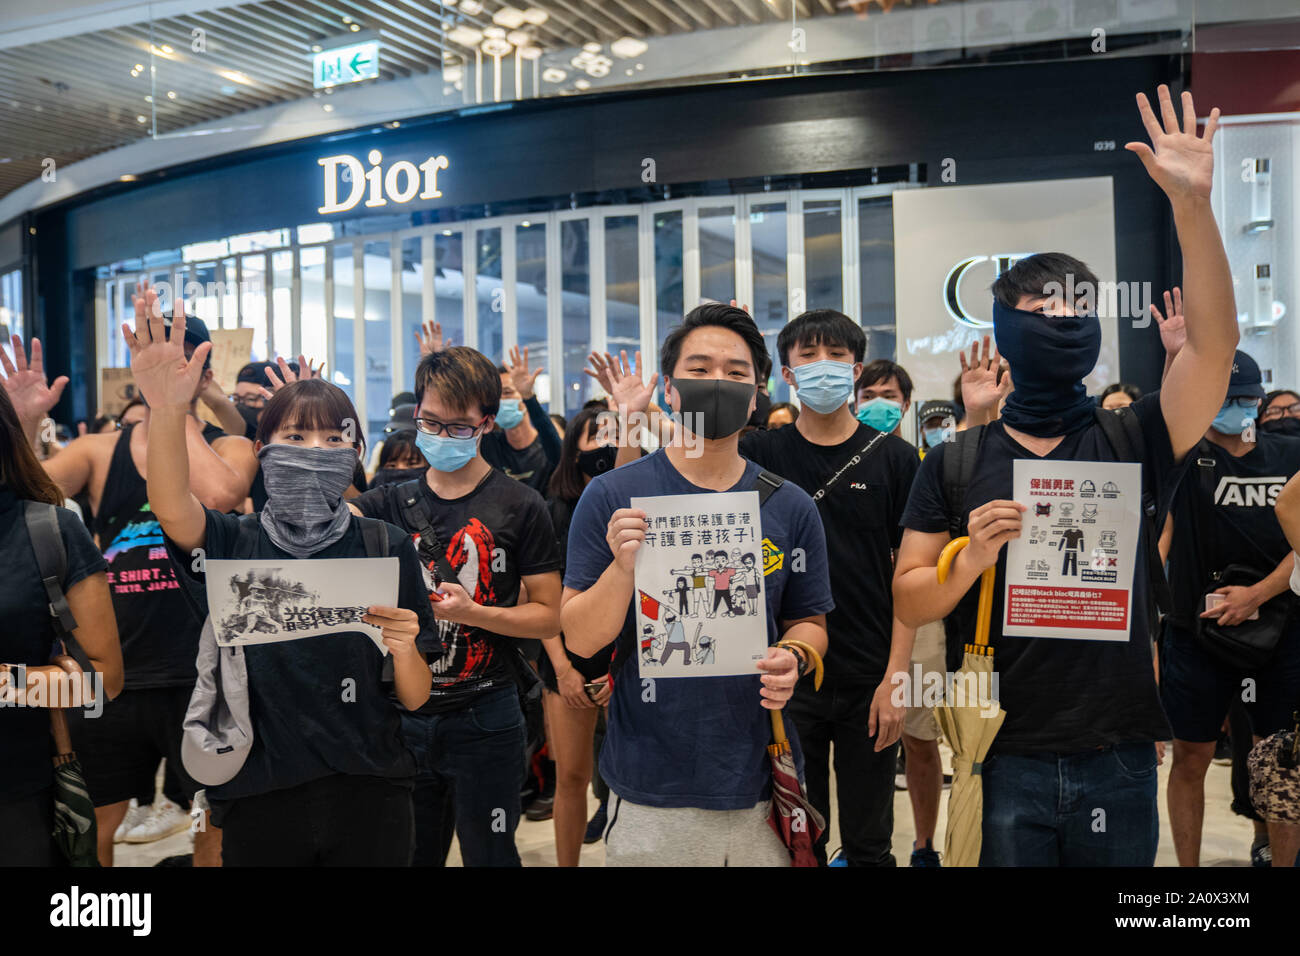 Pro-democracy protesters sing songs and shout slogans as they gather in a shopping mall during a rally in Yeun Long.Pro-democracy protesters have continued demonstrations across Hong Kong, calling for the city's Chief Executive Carrie Lam to immediately meet the rest of their demands, including an independent inquiry into police brutality, the retraction of the word “riot” to describe the rallies, and genuine universal suffrage, as the territory faces a leadership crisis. Stock Photo